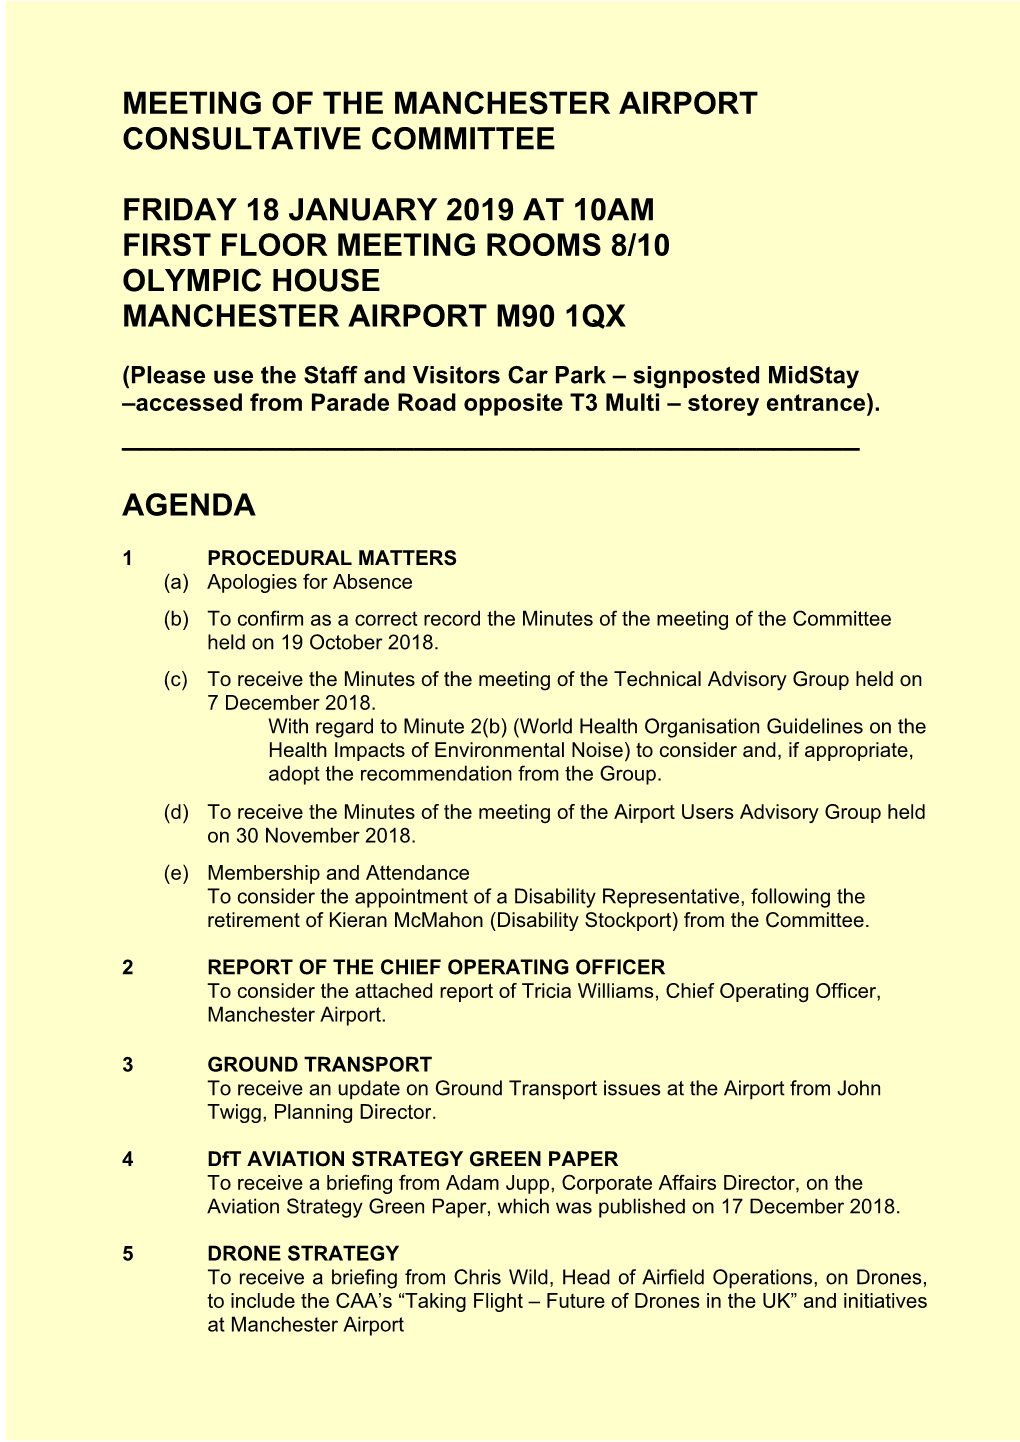 Meeting of the Manchester Airport Consultative Committee